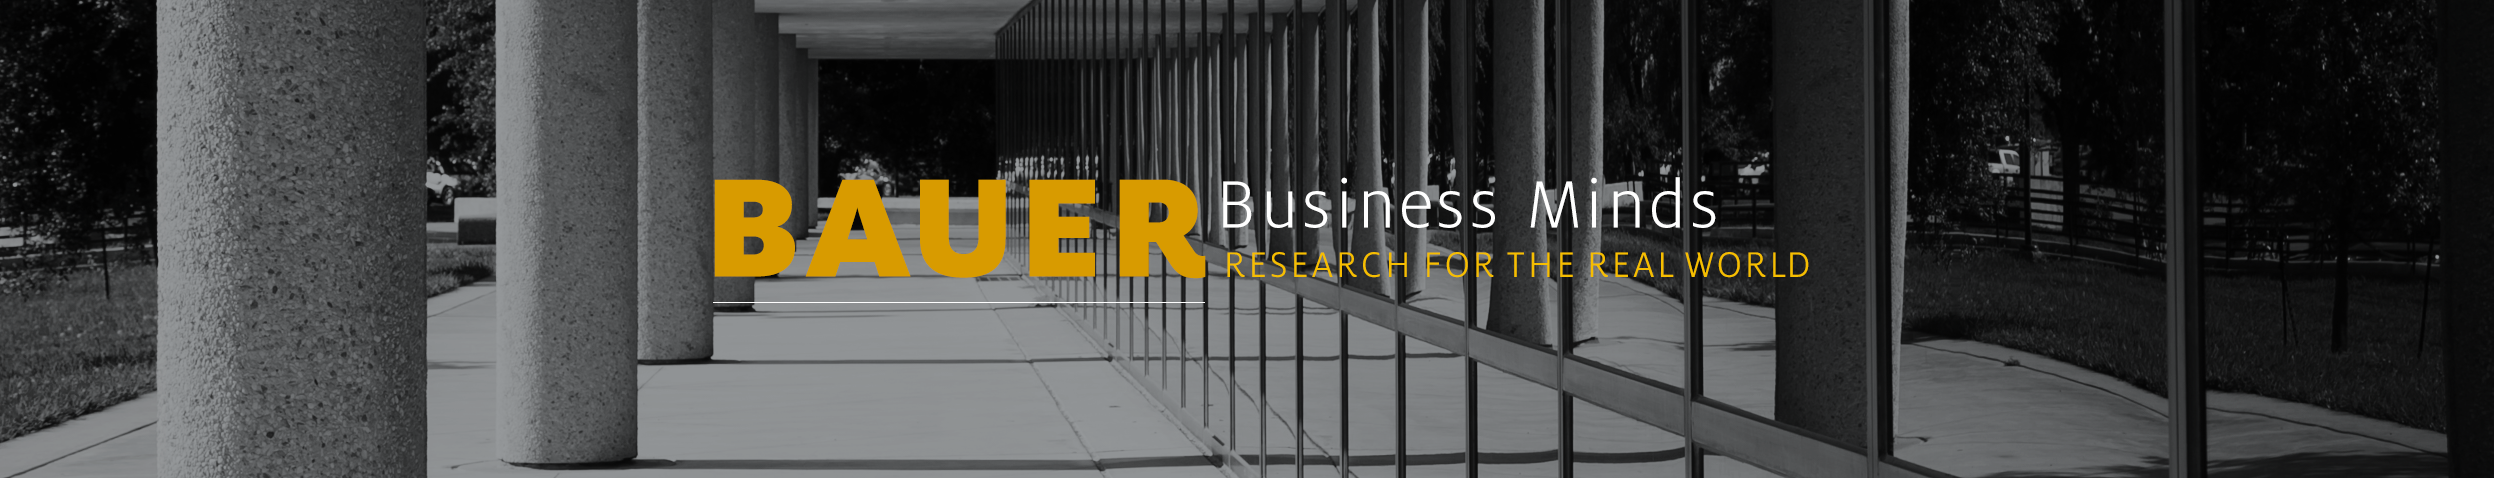 Bauer Business Minds: Research for the Real World